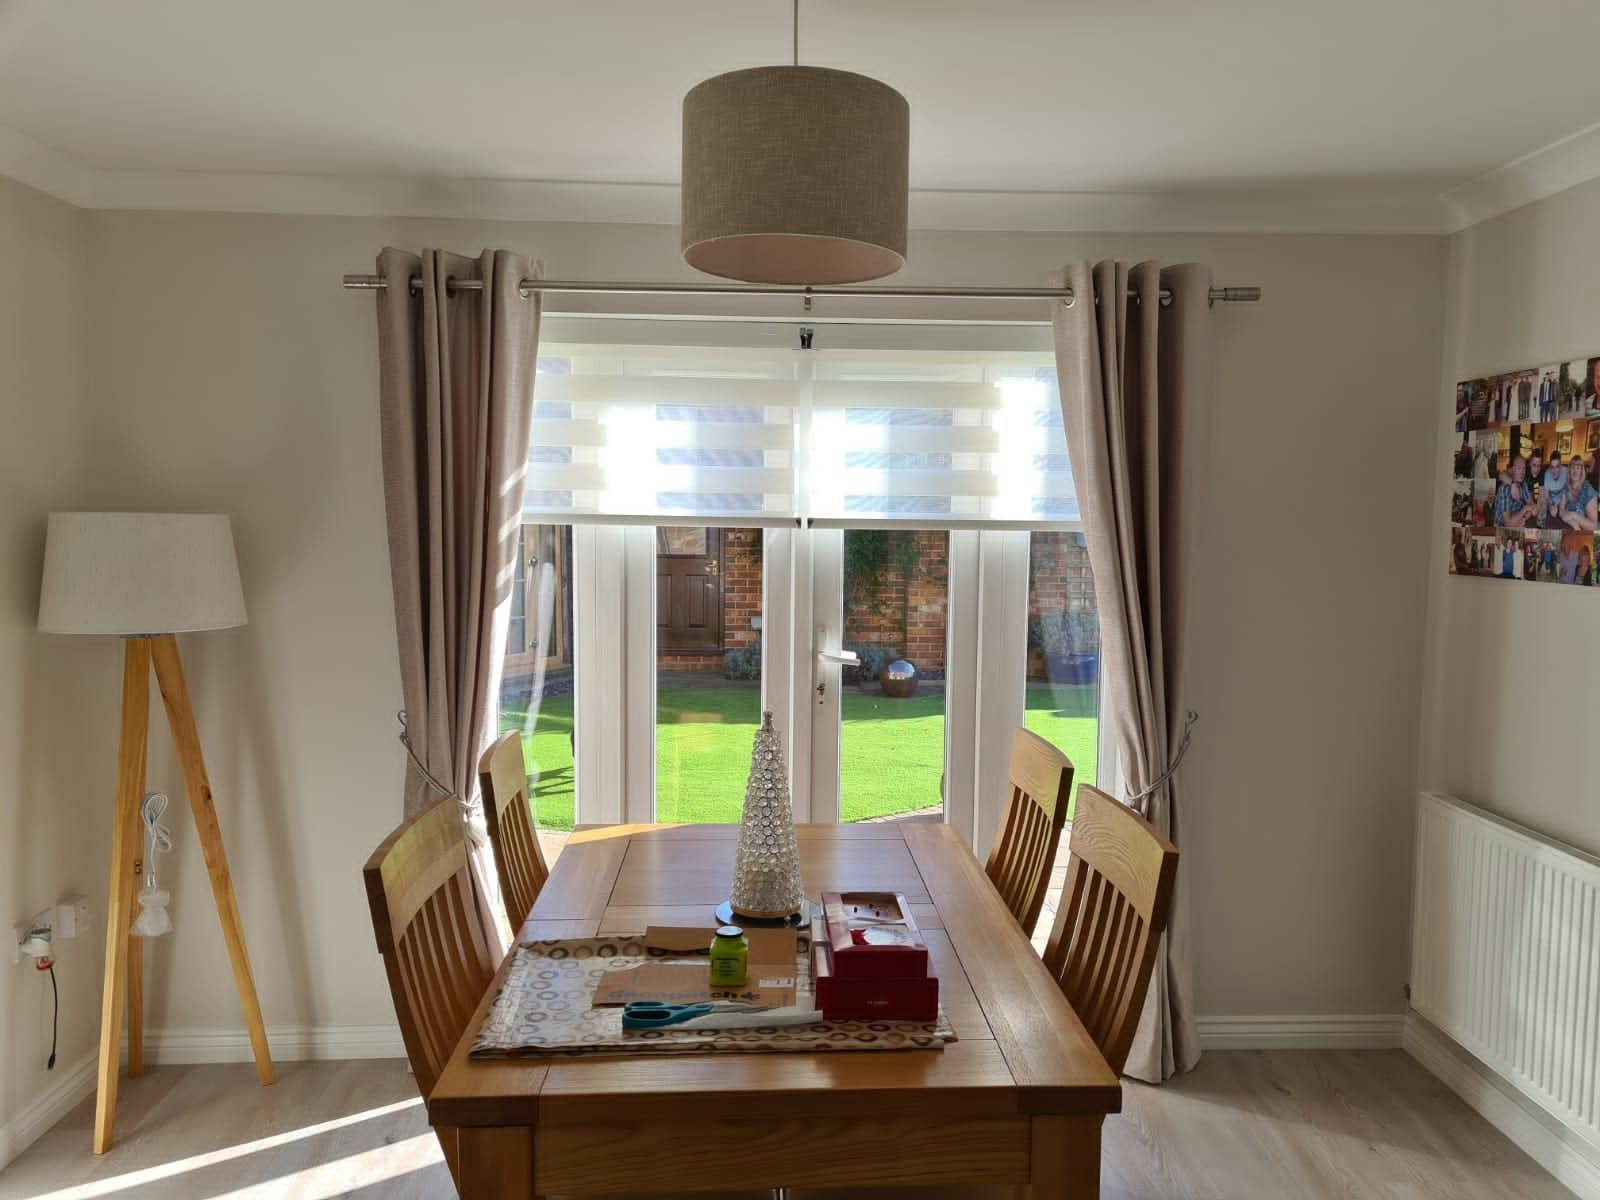 Some mirage blinds in a dining room